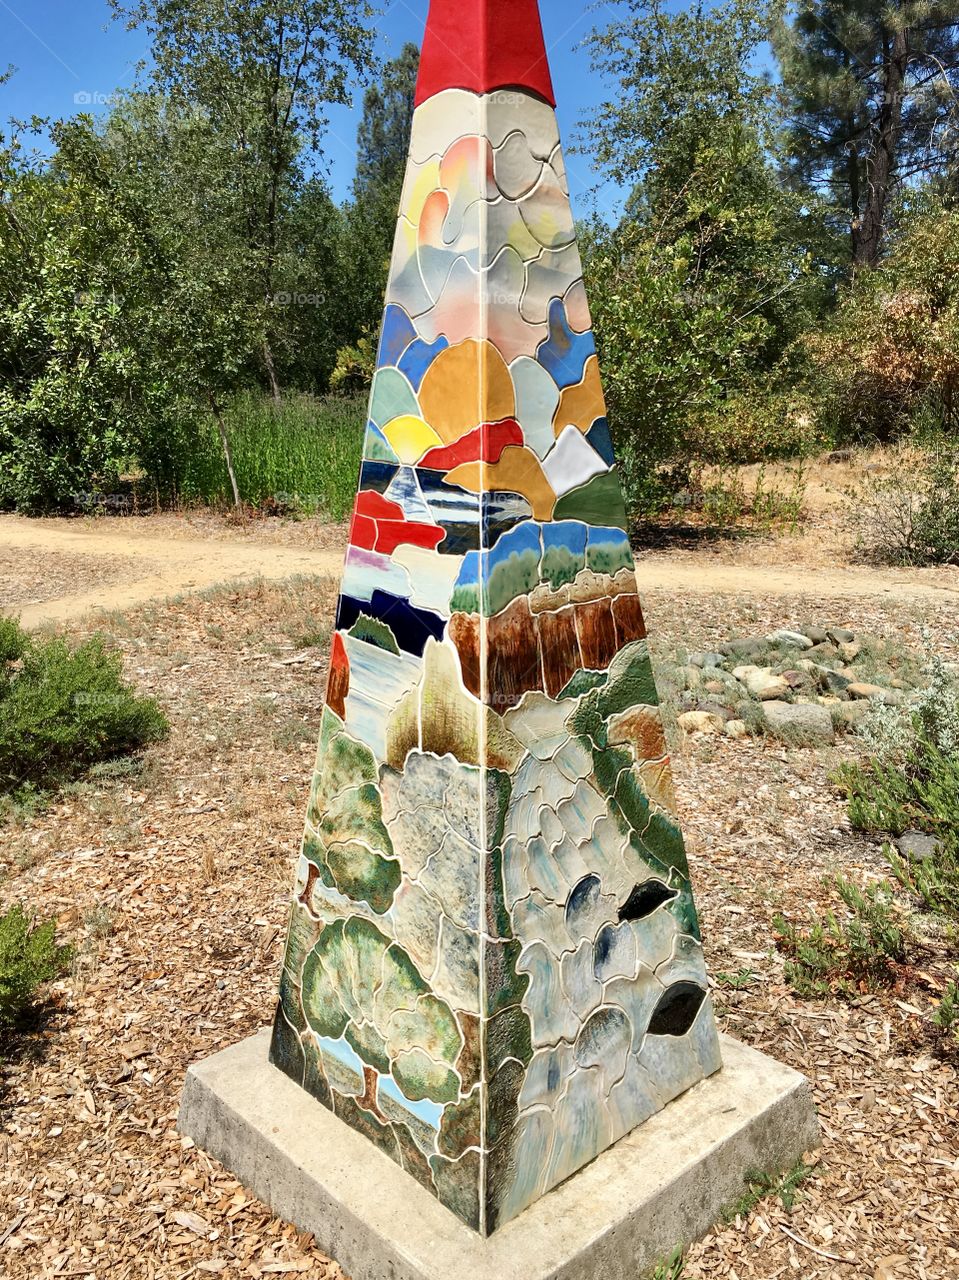 An artistic pyramid in the park made from tile 